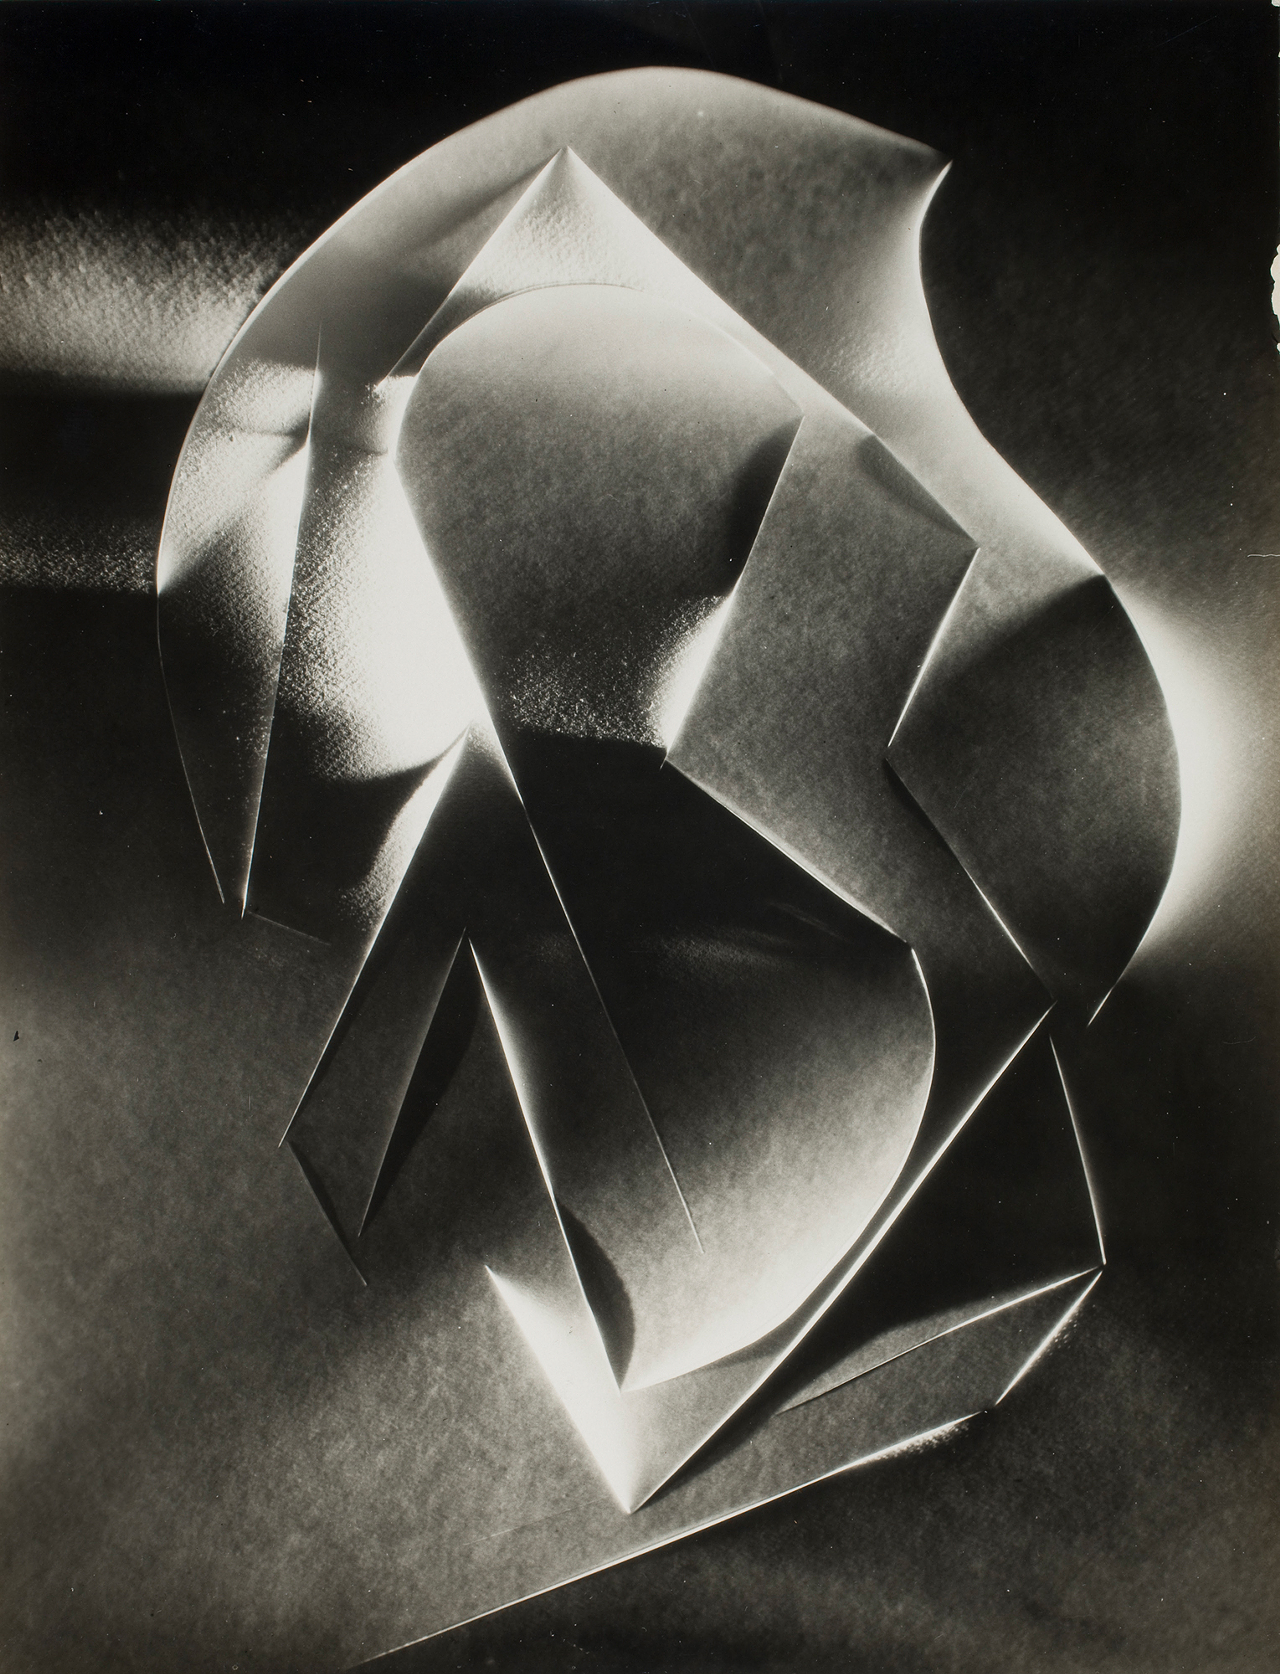 Cut-paper abstraction, ca. 1930. Gelatin silver print. Courtesy of George Eastman Museum, gift of Rosalinde Fuller